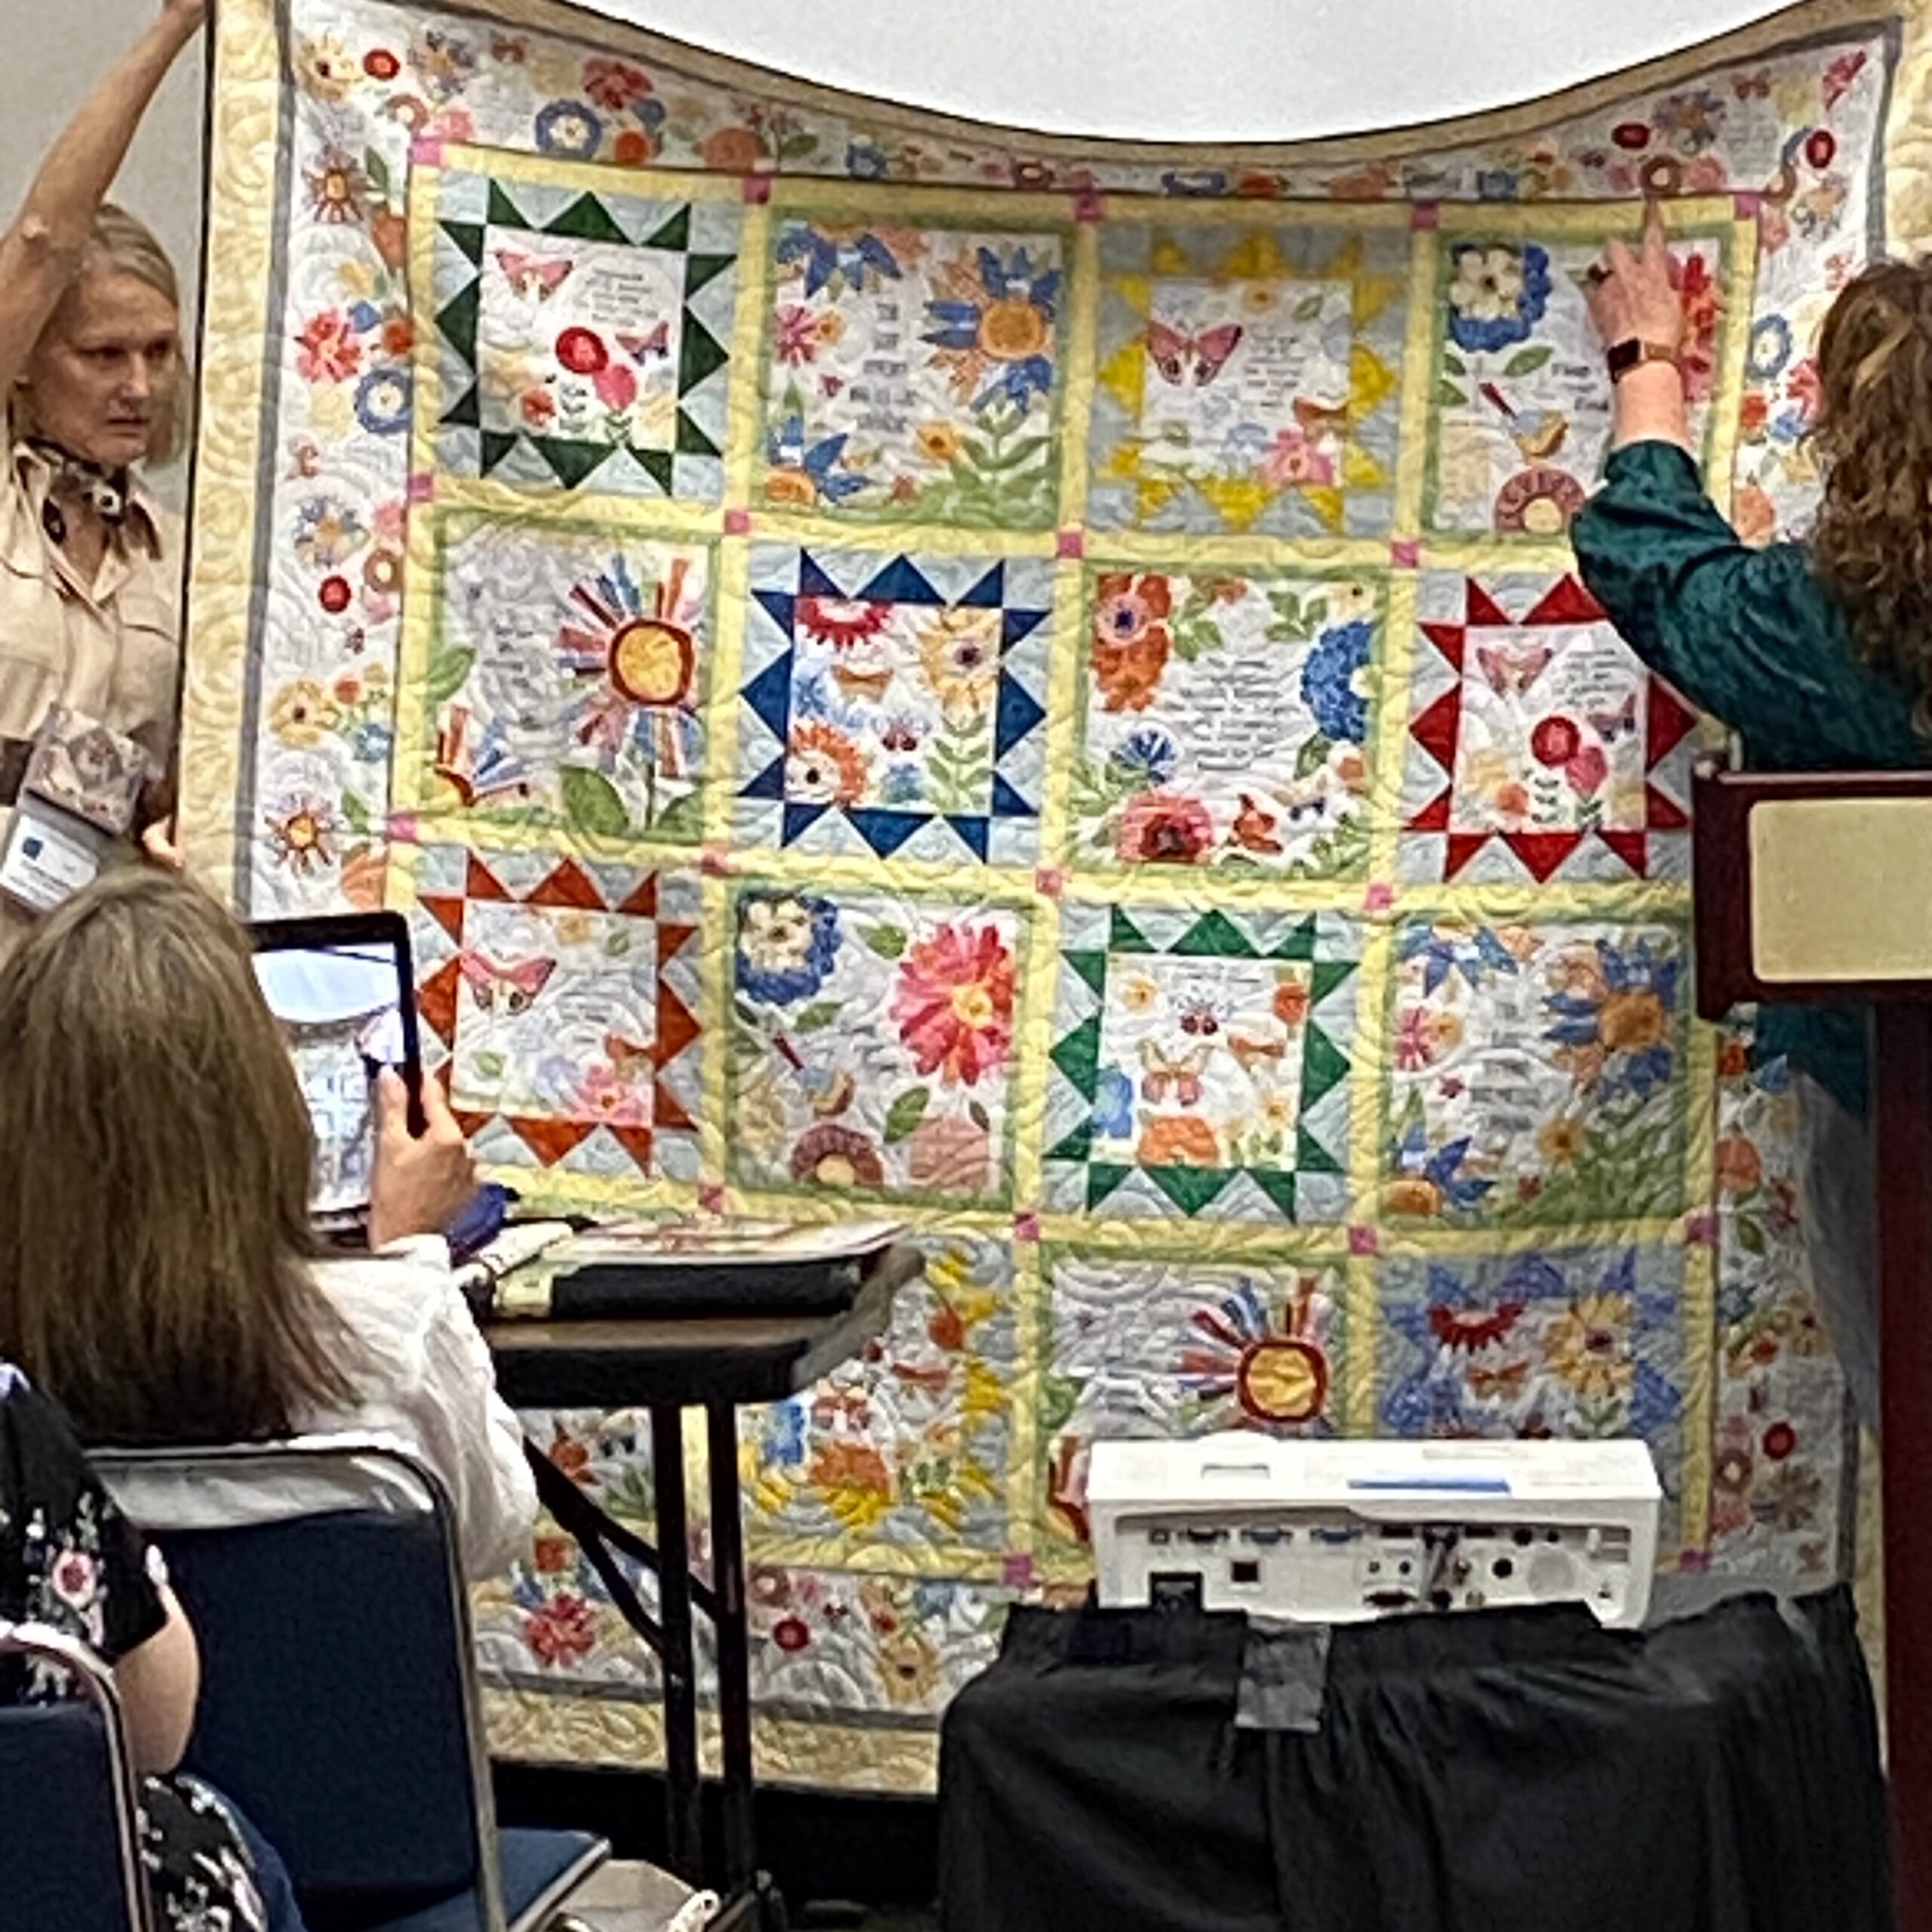 Quilting with Panels and Patchwork - Quilt 5 - Image